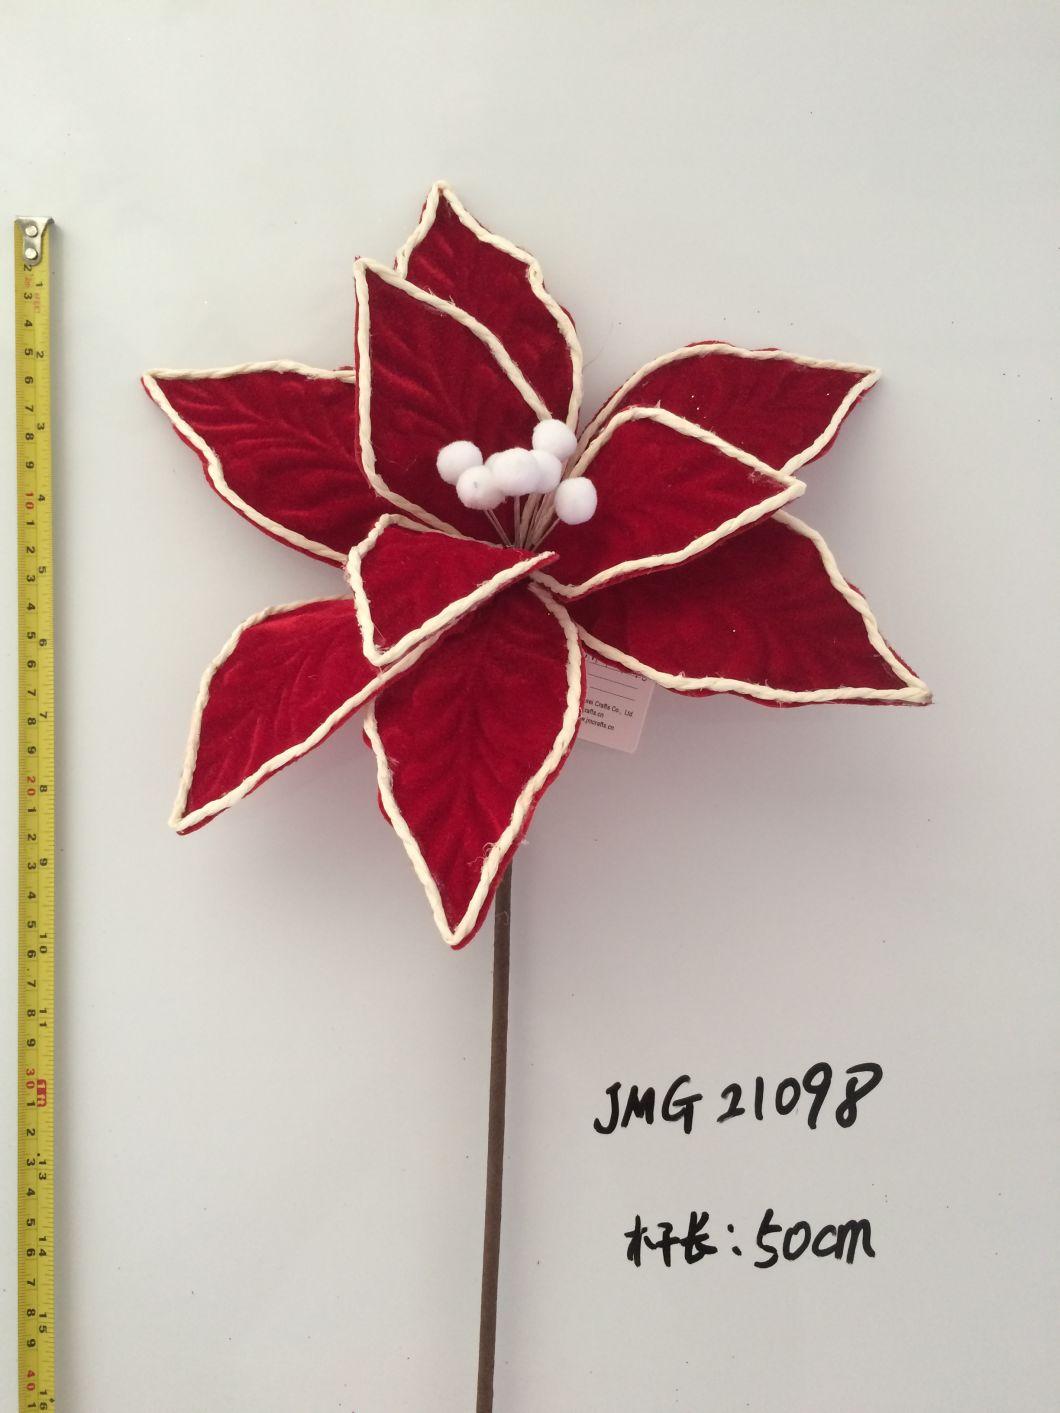 Ytcf107 China Directly Shipping Christmas Flower Poinsettia Flower